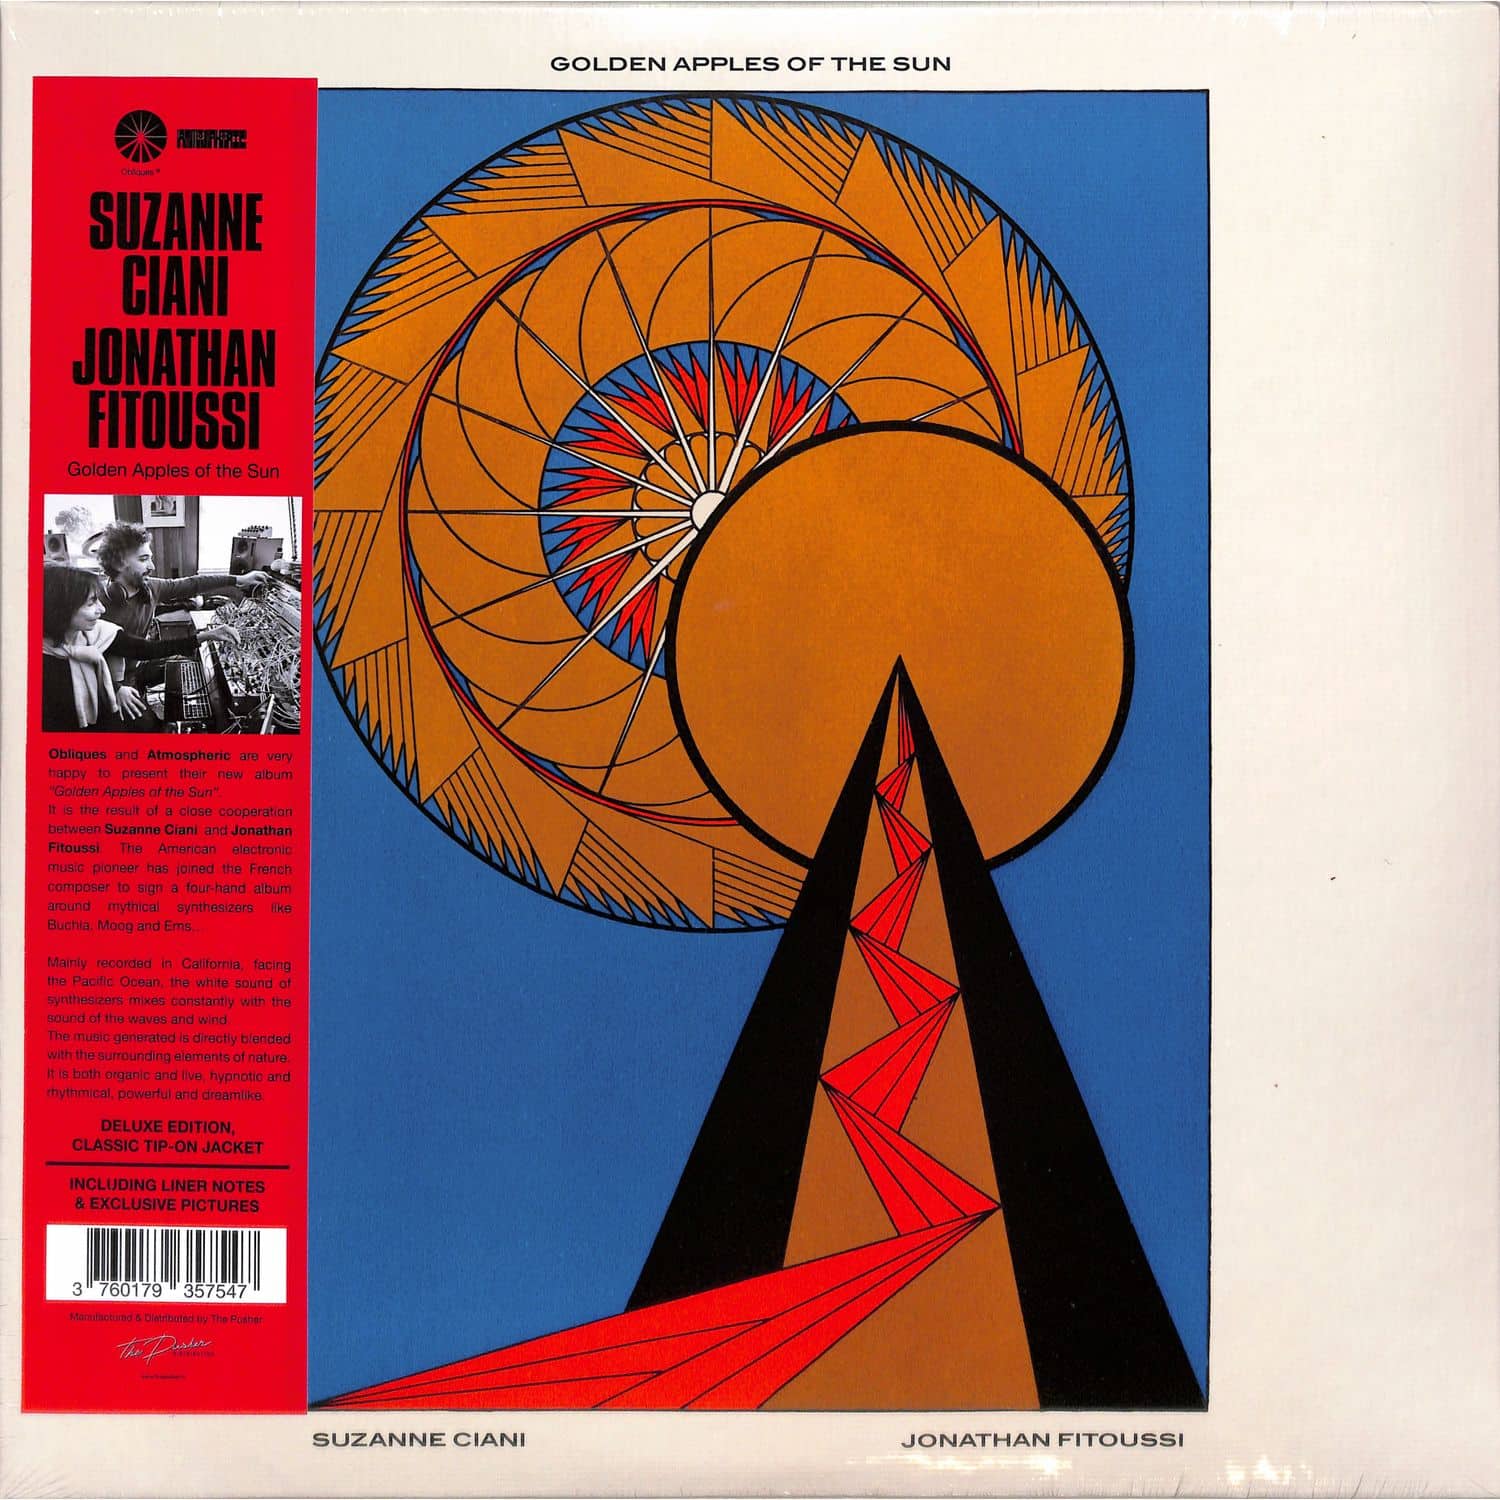 Suzanne Ciani & Jonathan Fitoussi - GOLDEN APPLES OF THE SUN 